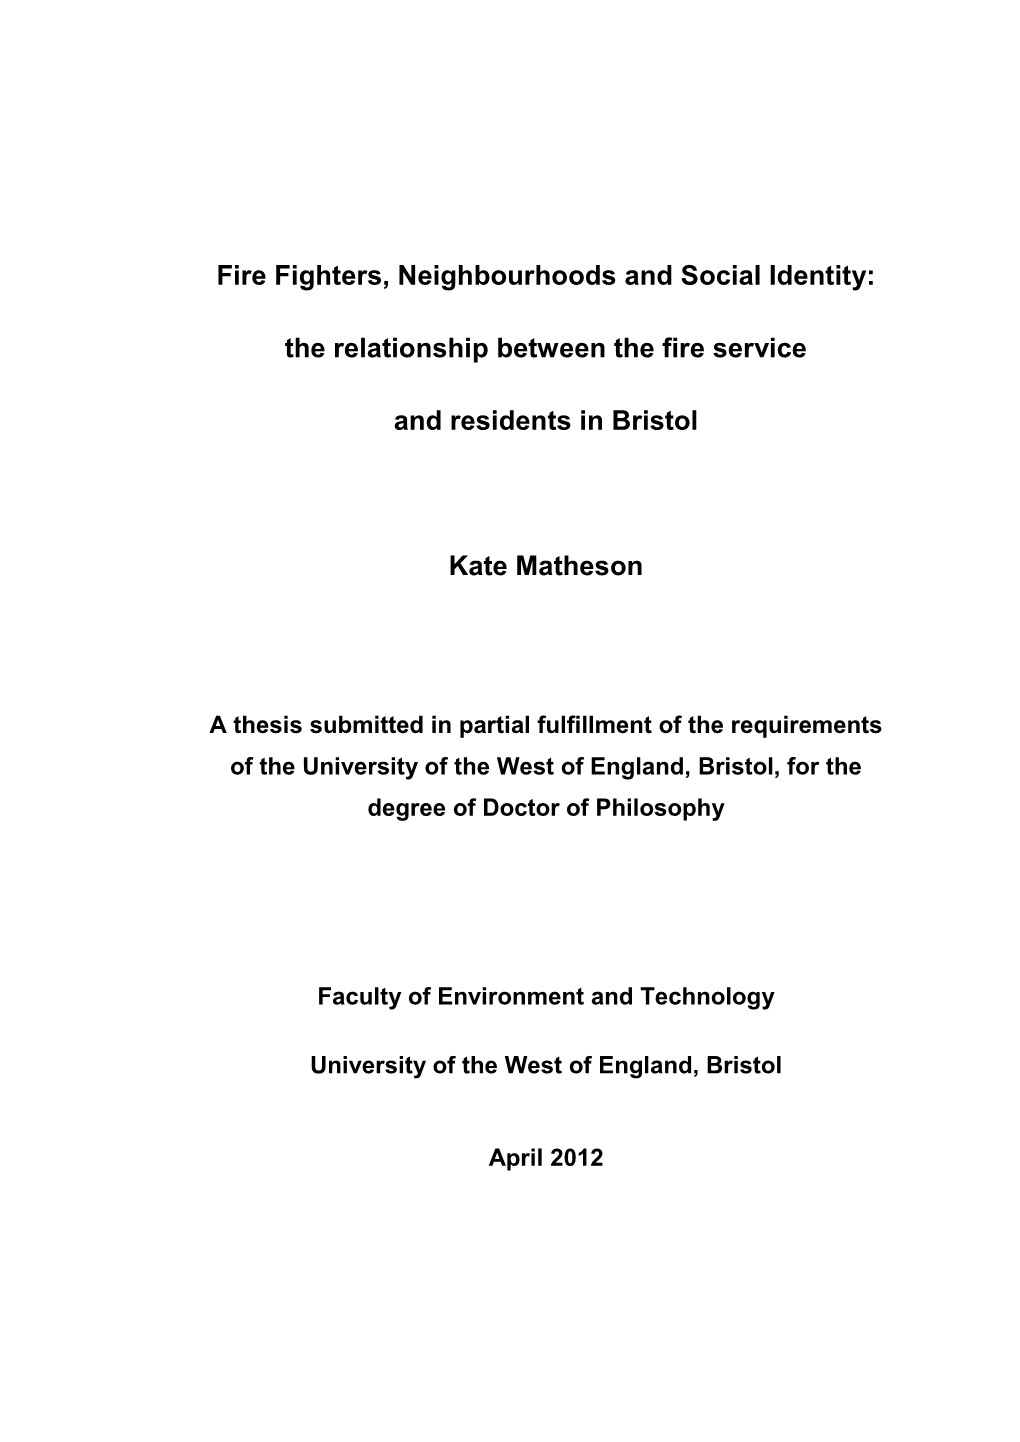 Fire Fighters, Neighbourhoods and Social Identity